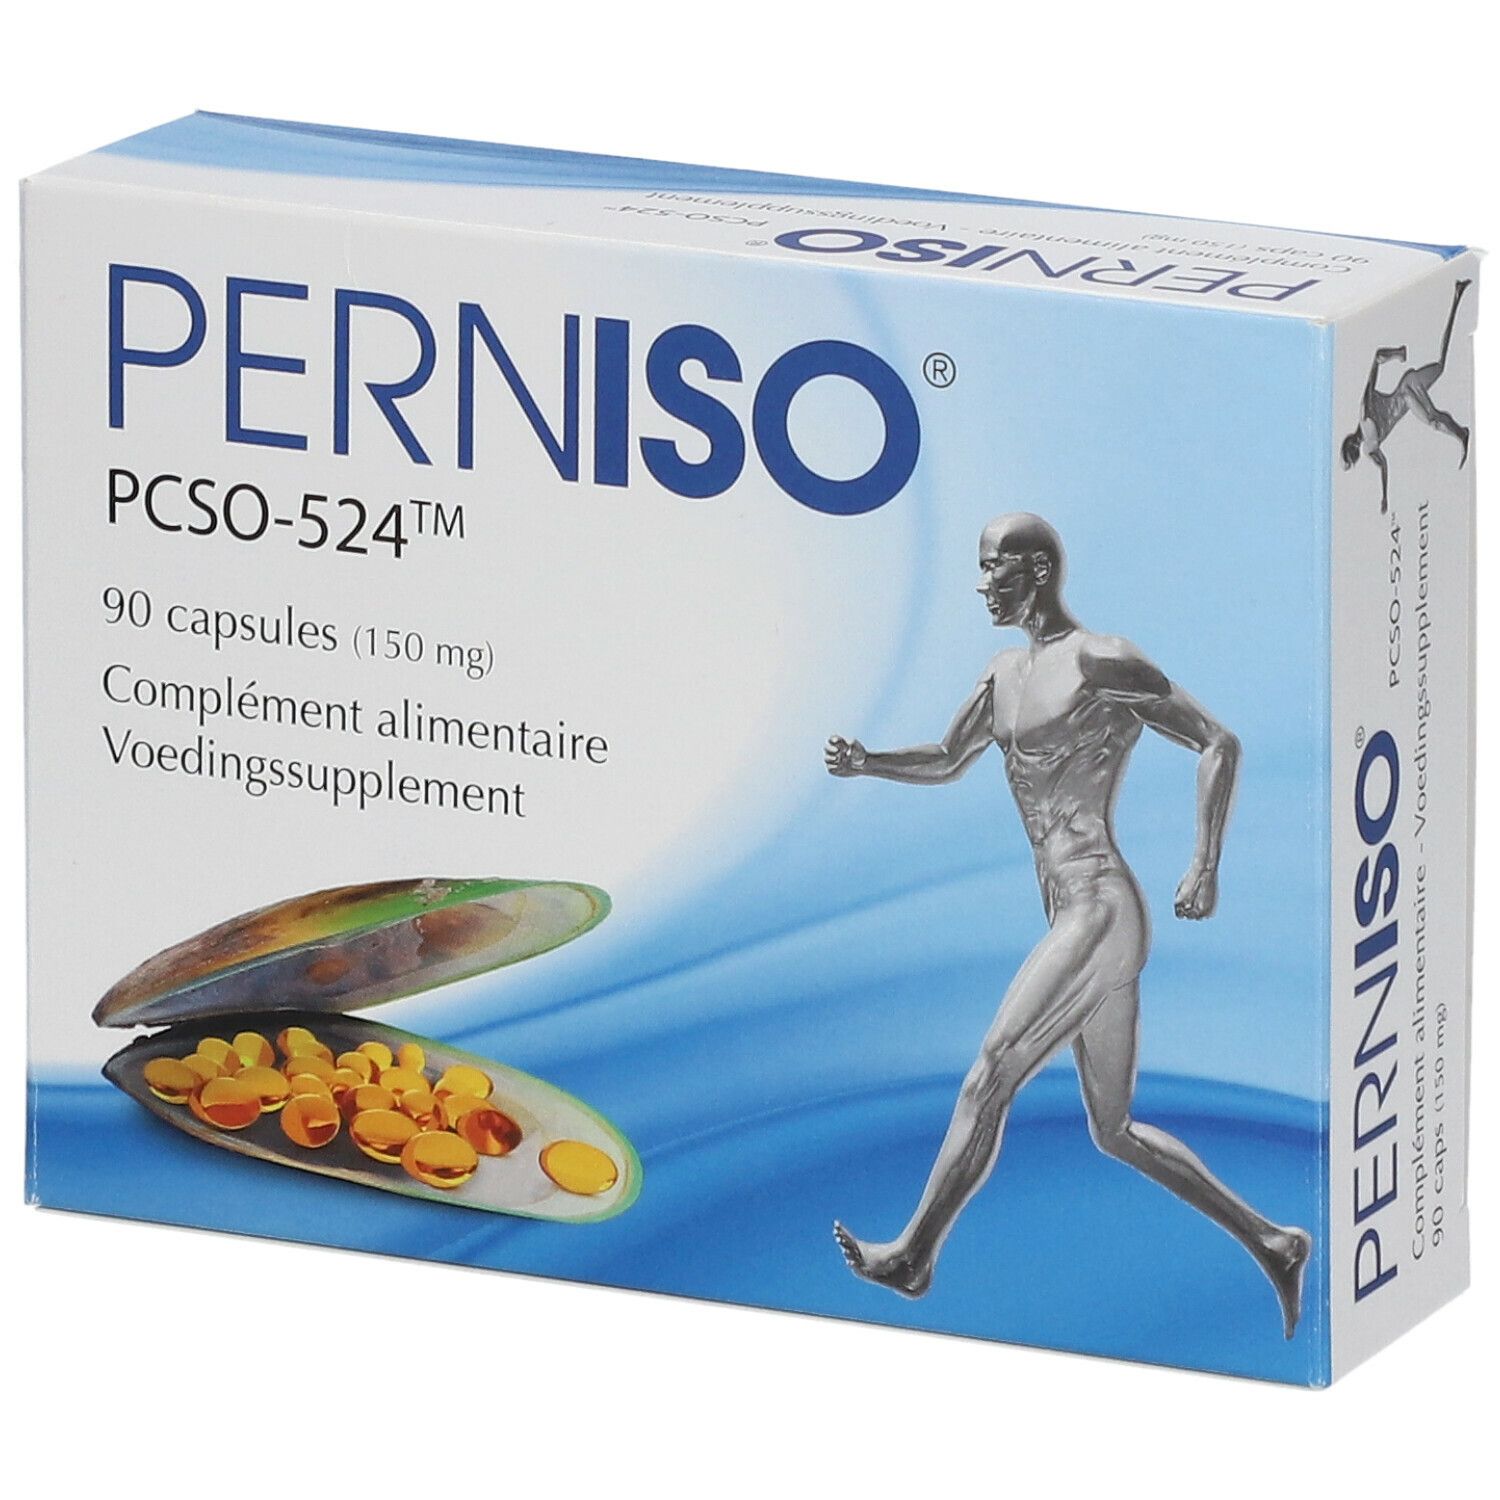 Image of PERNISO® PCSO-524™